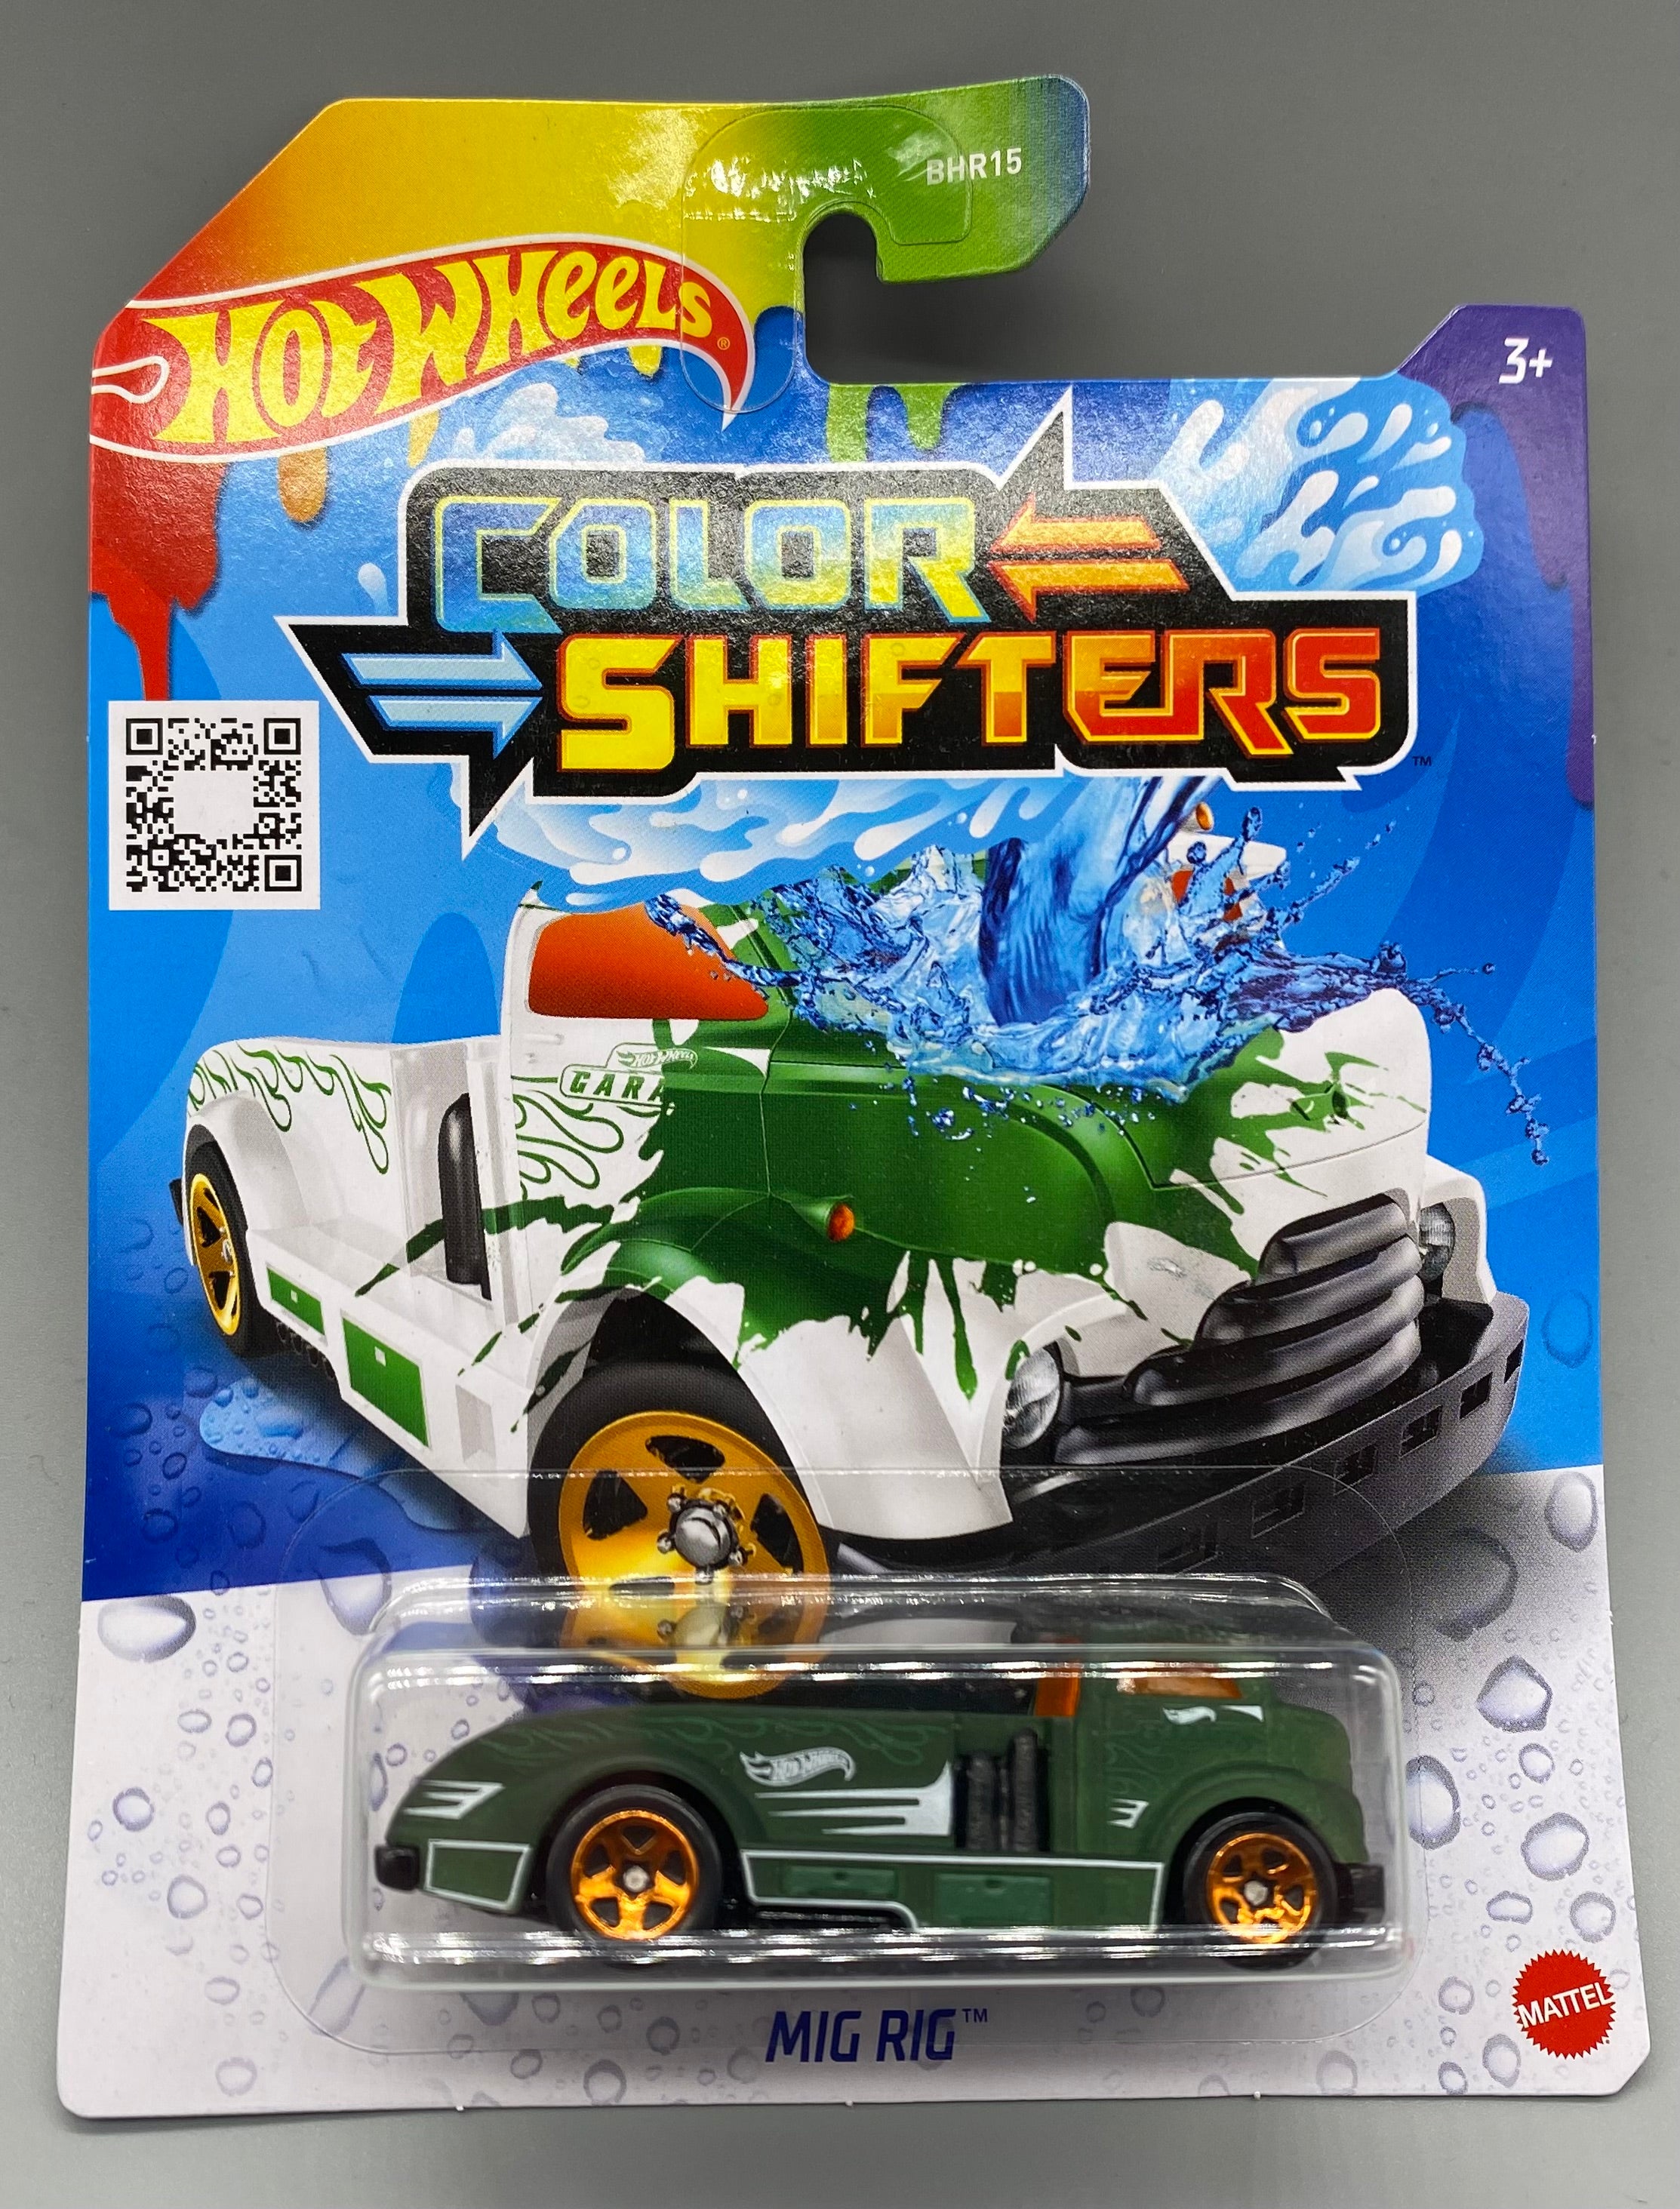  Hot Wheels 2020 Color Shifters MIGRIG Green/White : Toys & Games